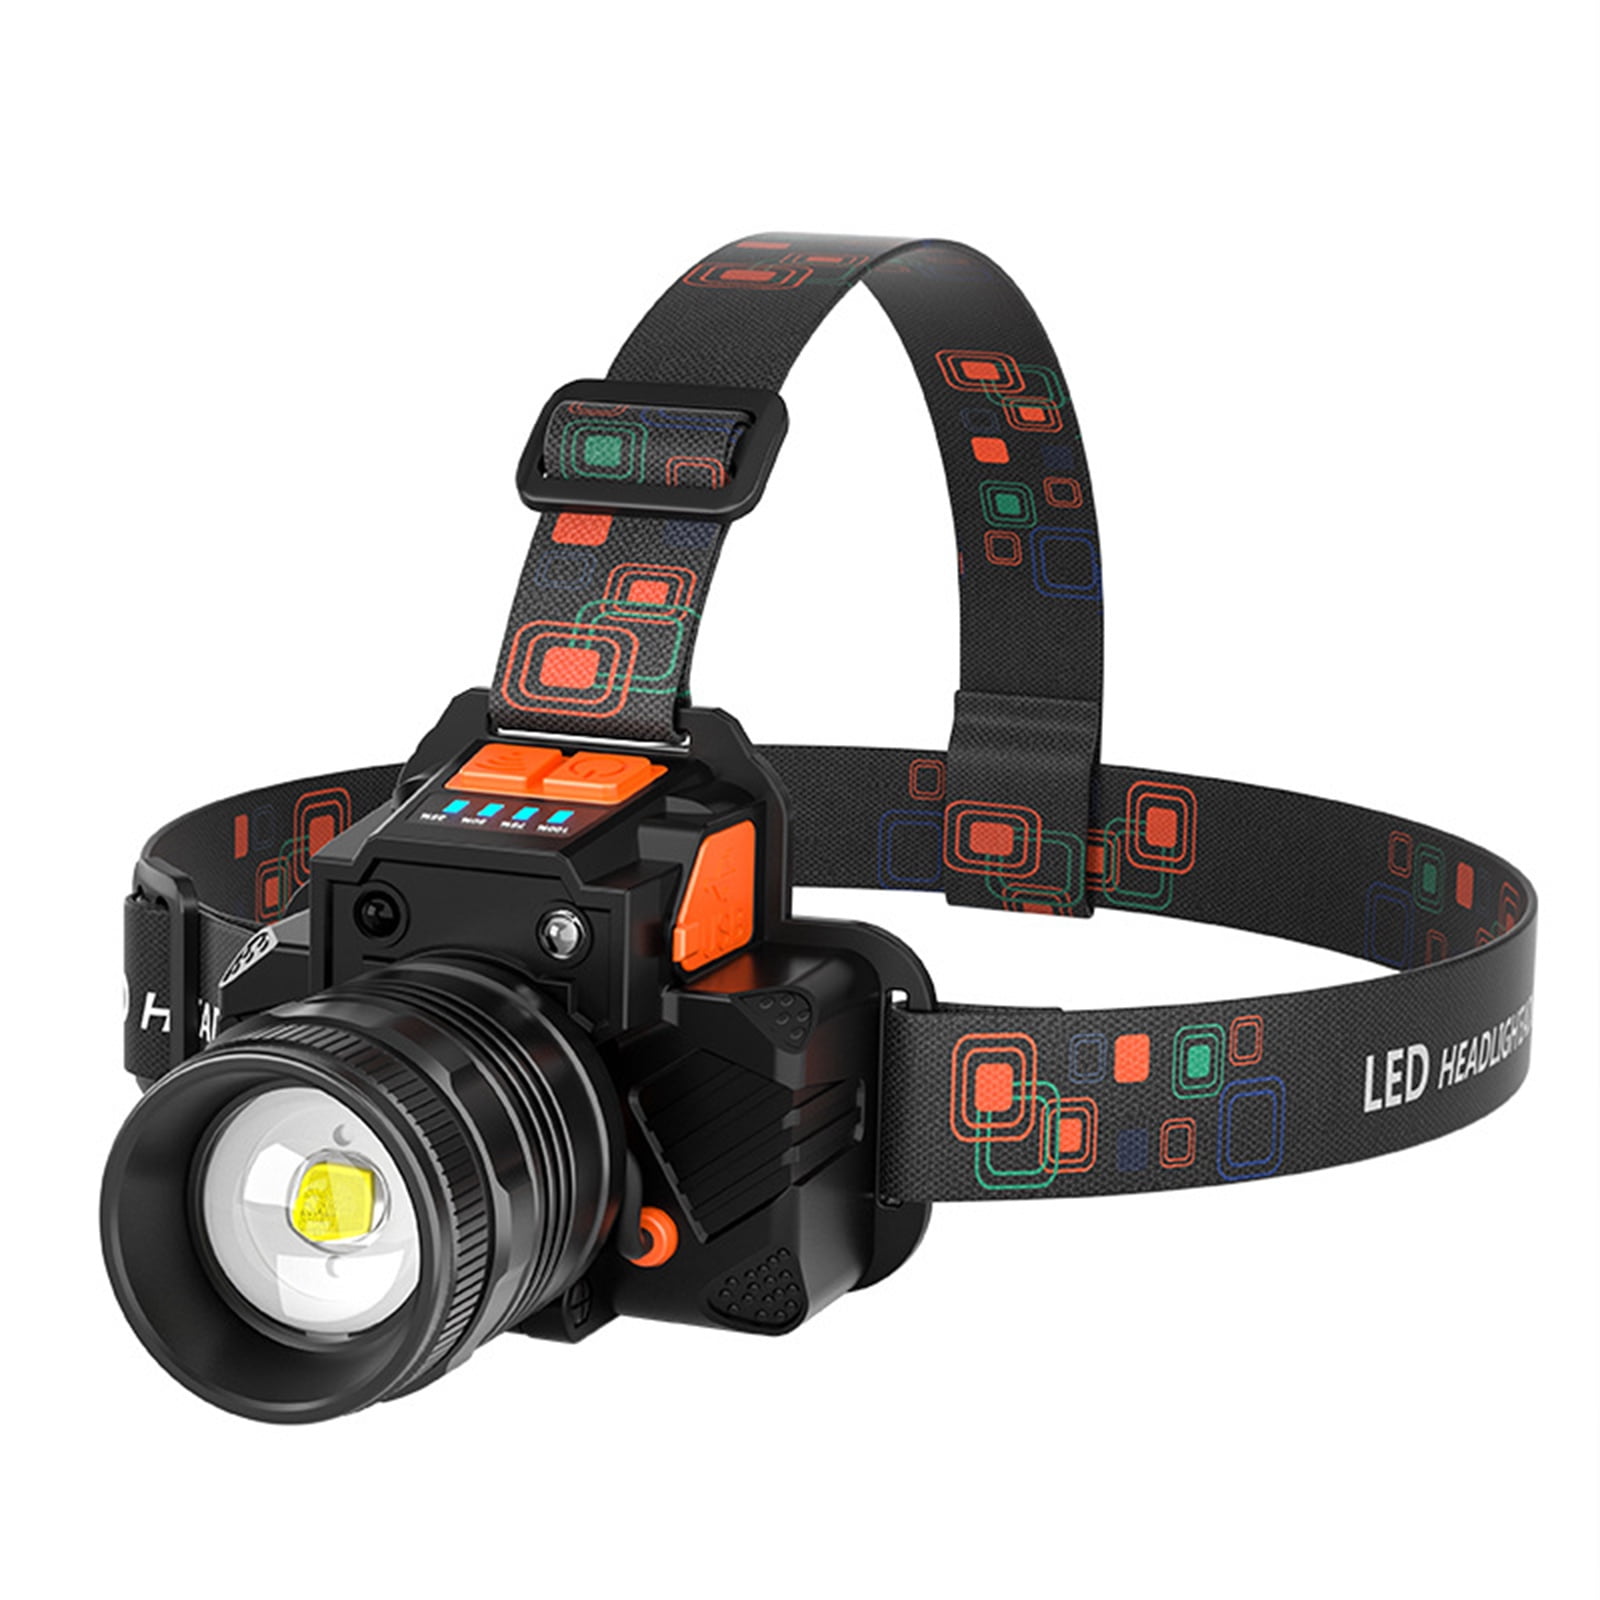 Okwish Fishing Headlamp Torch Outdoor USB LED Headlight Super Bright Light  Modes Suitable For Camping Rechargeable Sensor